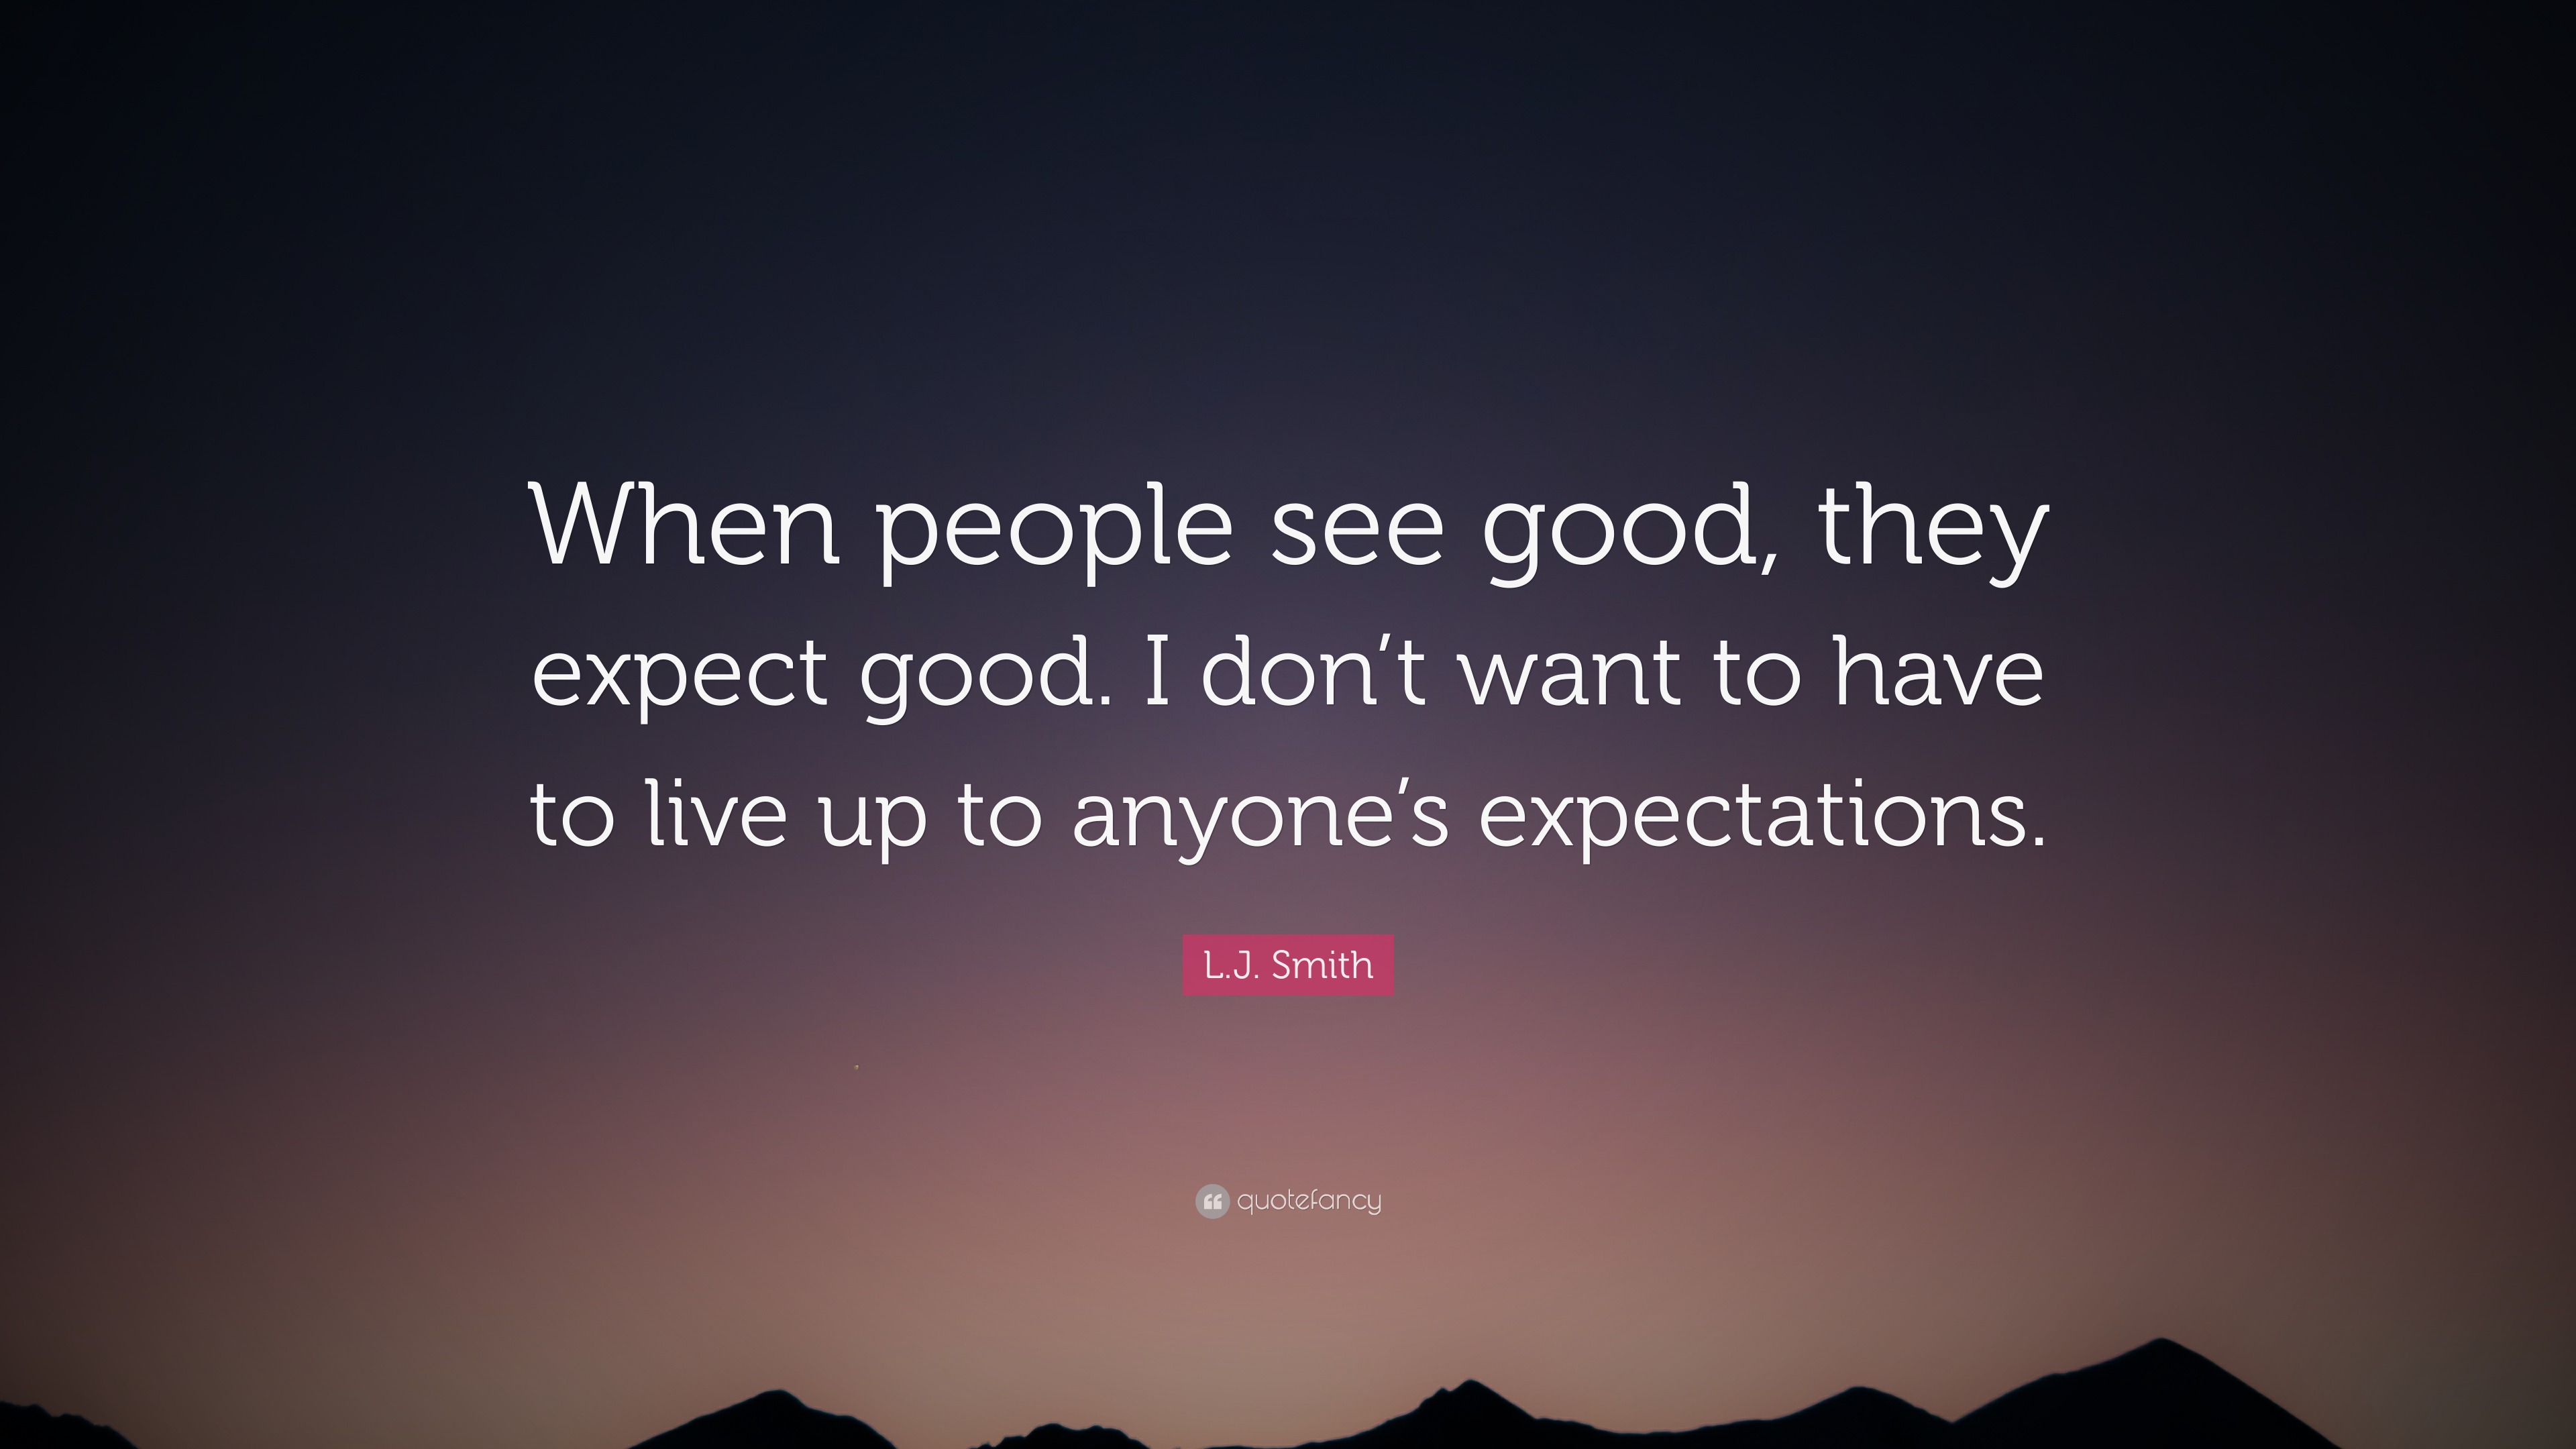 L.J. Smith Quote: “When people see good, they expect good. I don’t want ...